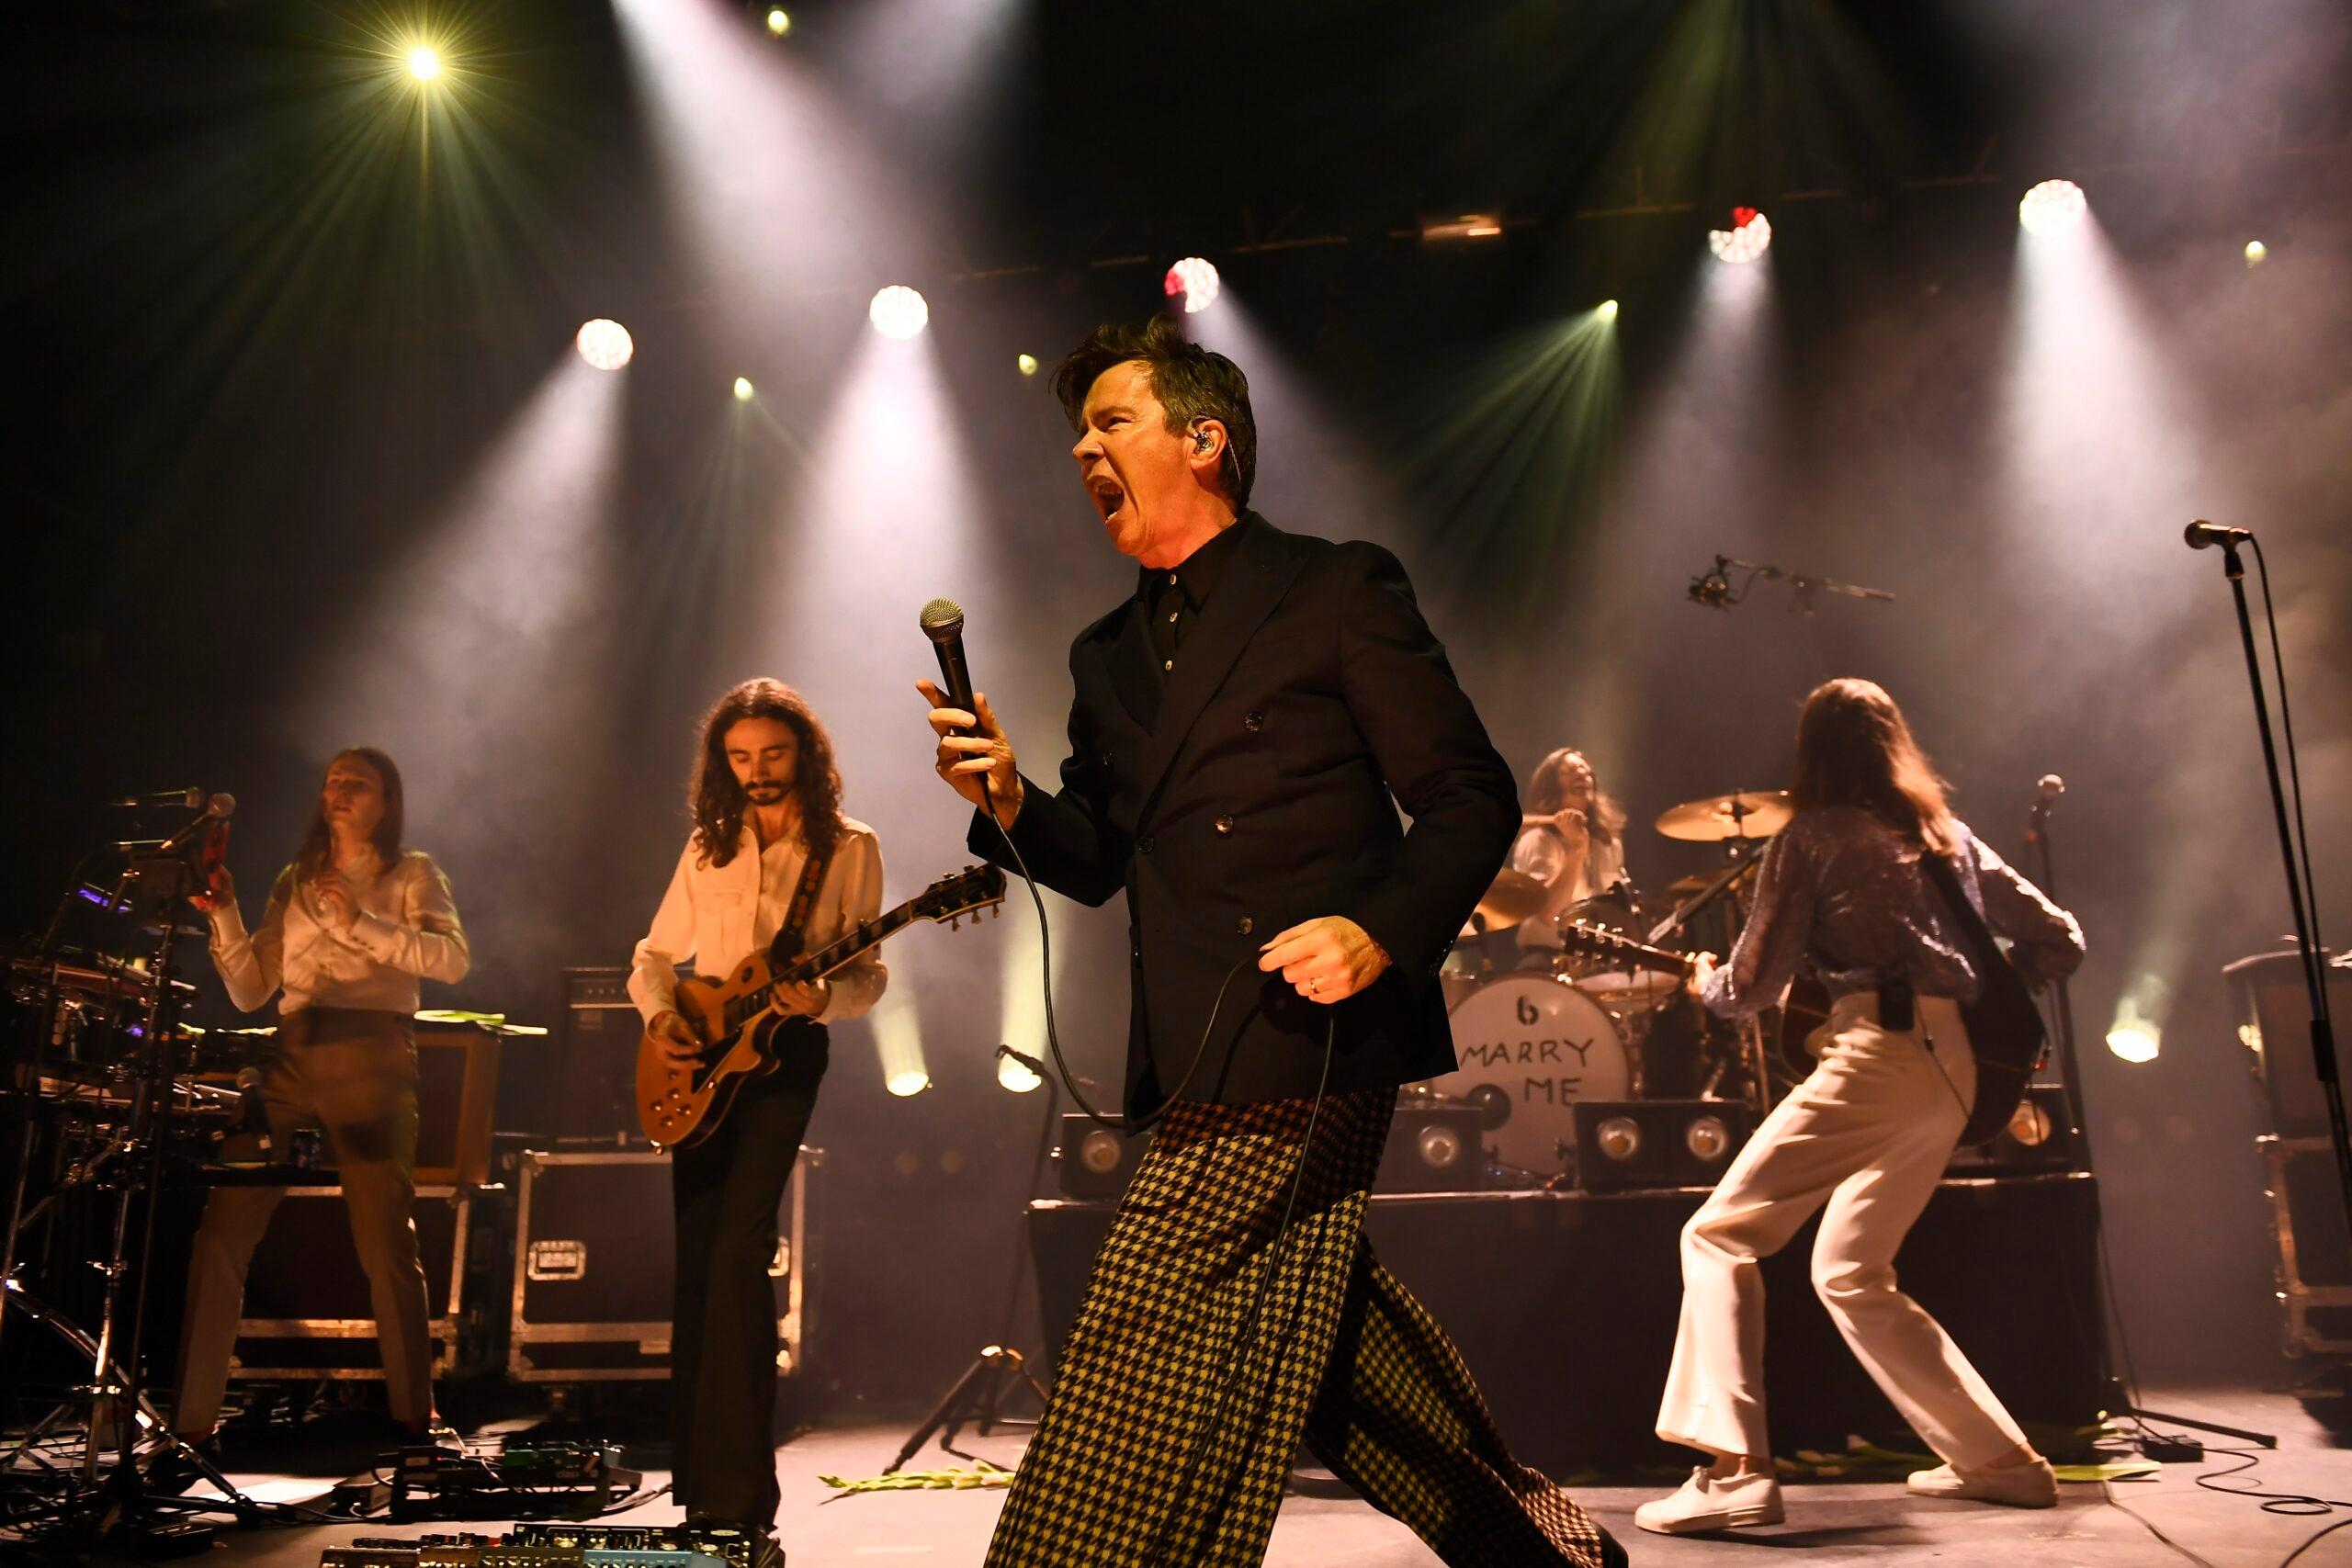 Rick Astley and Blossoms performing The Smiths at The Forum London